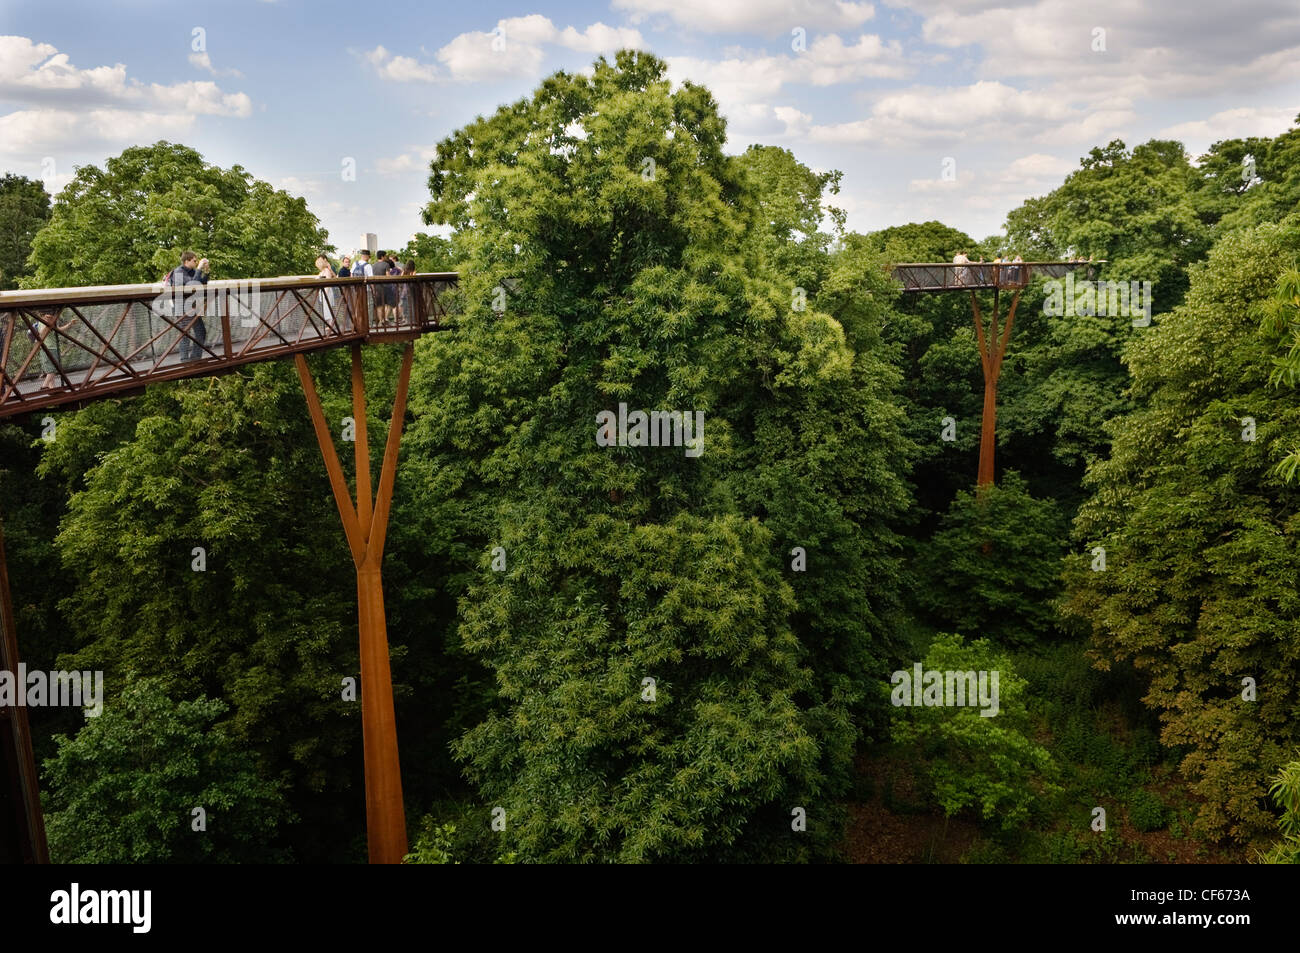 The Xstrata Treetop Walkway, a permanent new attraction in the heart of Kew Gardens, taking visitors on an amazing journey from Stock Photo